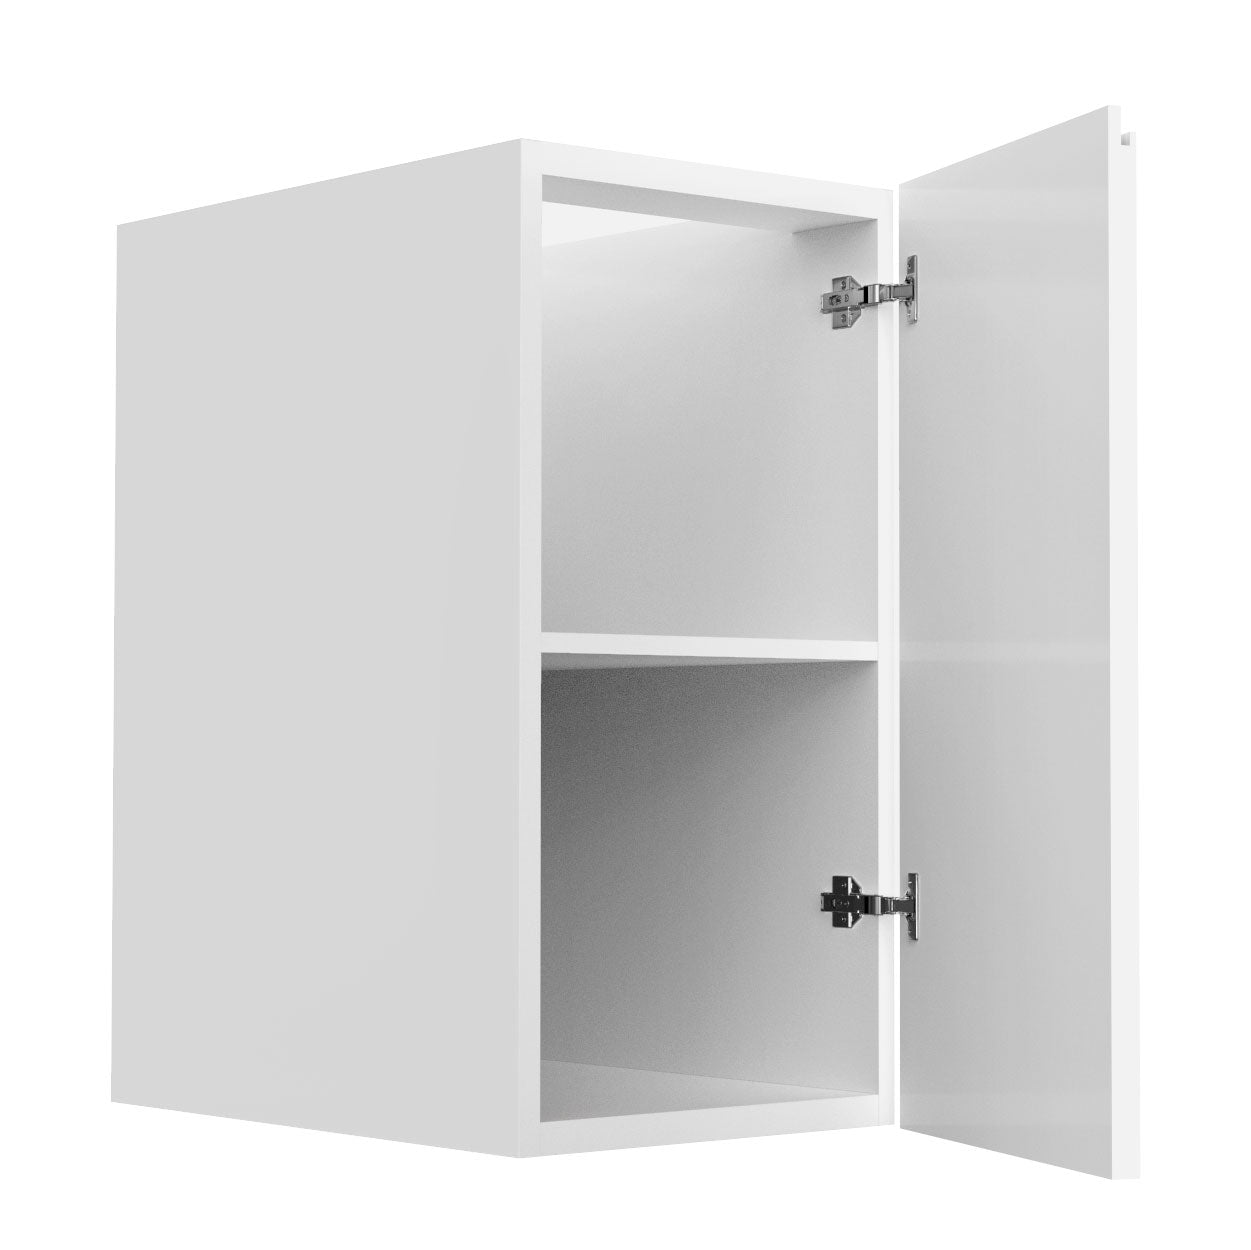 Kitchen Cabinet - RTA - Lacquer White - Full Height Kitchen Cabinet - Single Door Base | 15"W x 34.5"H x 23.8"D